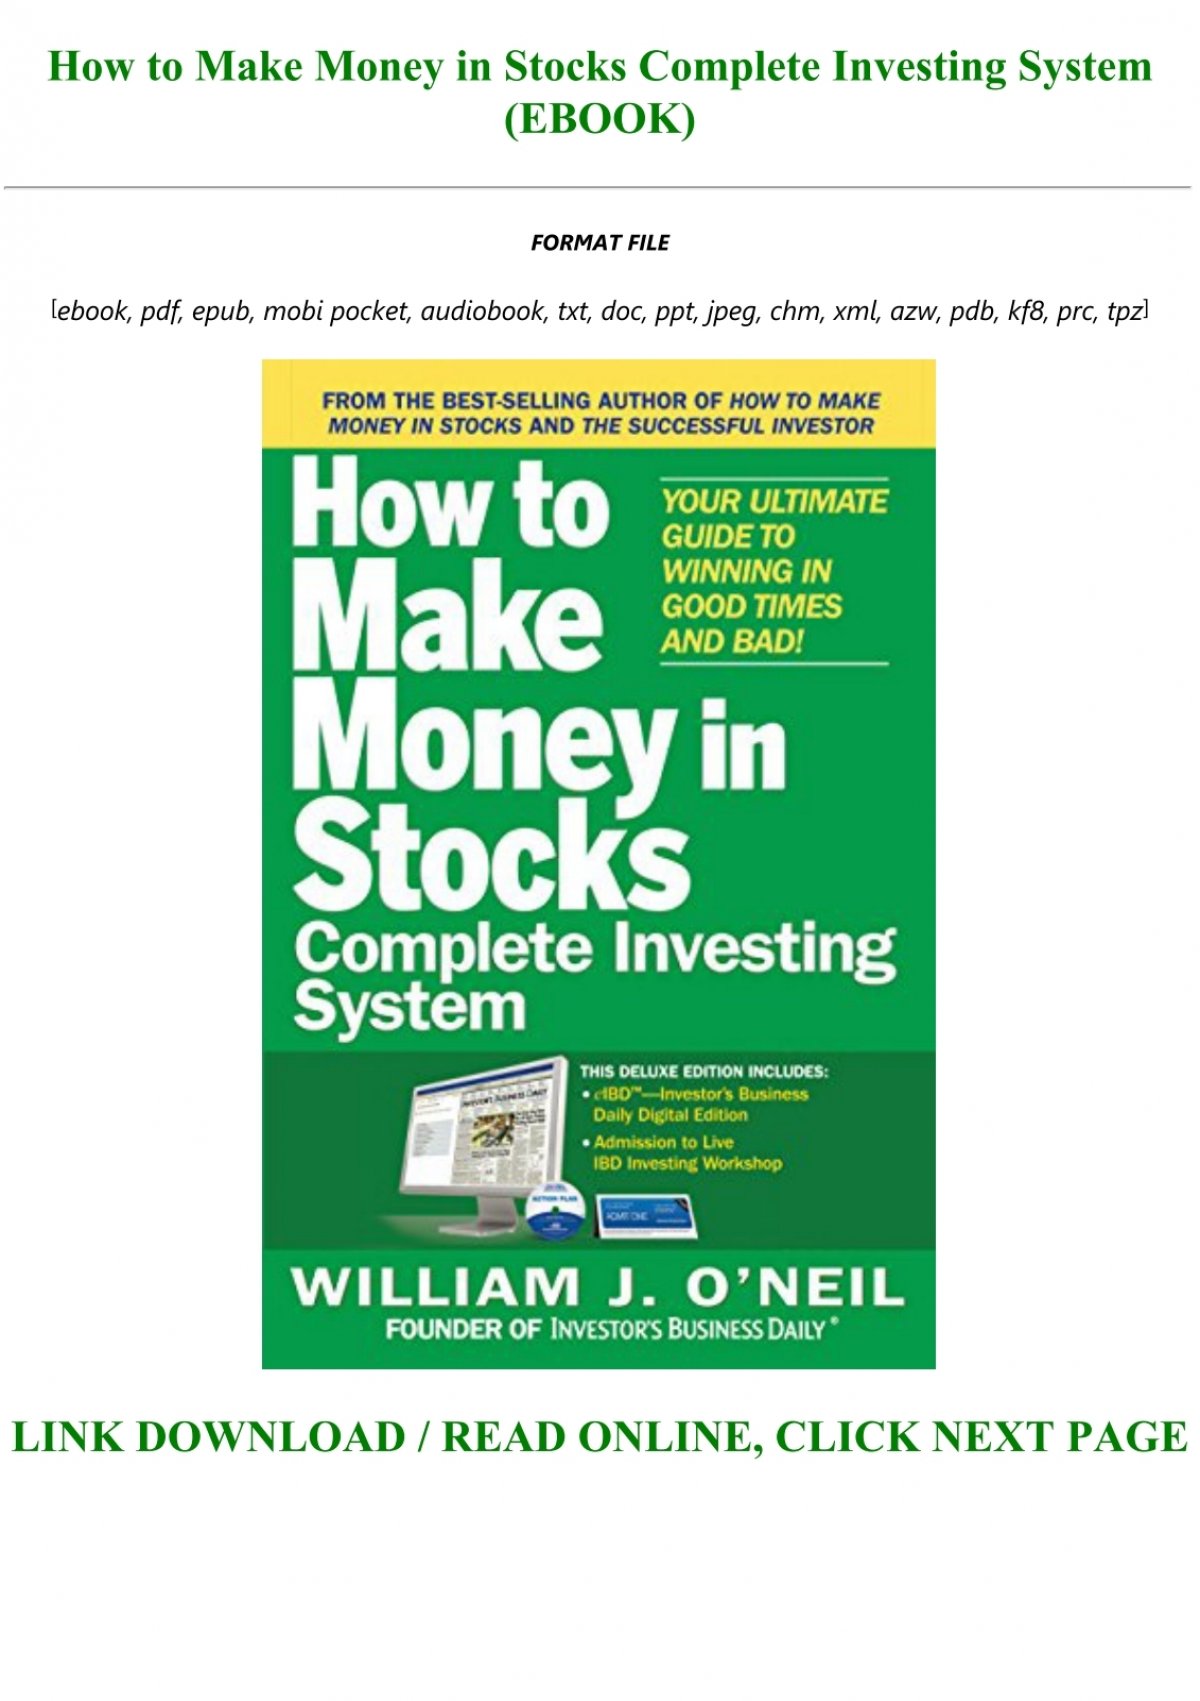 investing in canadian stocks from us - Money|Stocks|Stock|System|Book|Market|Trading|Books|Guide|Times|Day|Der|Download|Investors|Edition|Investor|Description|Pdf|Format|Epub|O'neil|Die|Strategies|Strategy|Mit|Investing|Dummies|Risk|Gains|Business|Man|Investment|Years|World|Wie|Action|Charts|William|Dad|Plan|Good Times|Stock Market|Ultimate Guide|Mobi Format|Full Book|Day Trading|National Bestseller|Successful Investing|Rich Dad|Seven-Step Process|Maximizing Gains|Major Study|American Association|Individual Investors|Mutual Funds|Book Description|Download Book Description|Handbuch Des|Stock Market Winners|12-Year Study|Leading Investment Strategies|Top-Performing Strategy|System-You Get|Easy Steps|Daily Resource|Big Winners|Market Rally|Big Losses|Market Downturn|Canslim Method